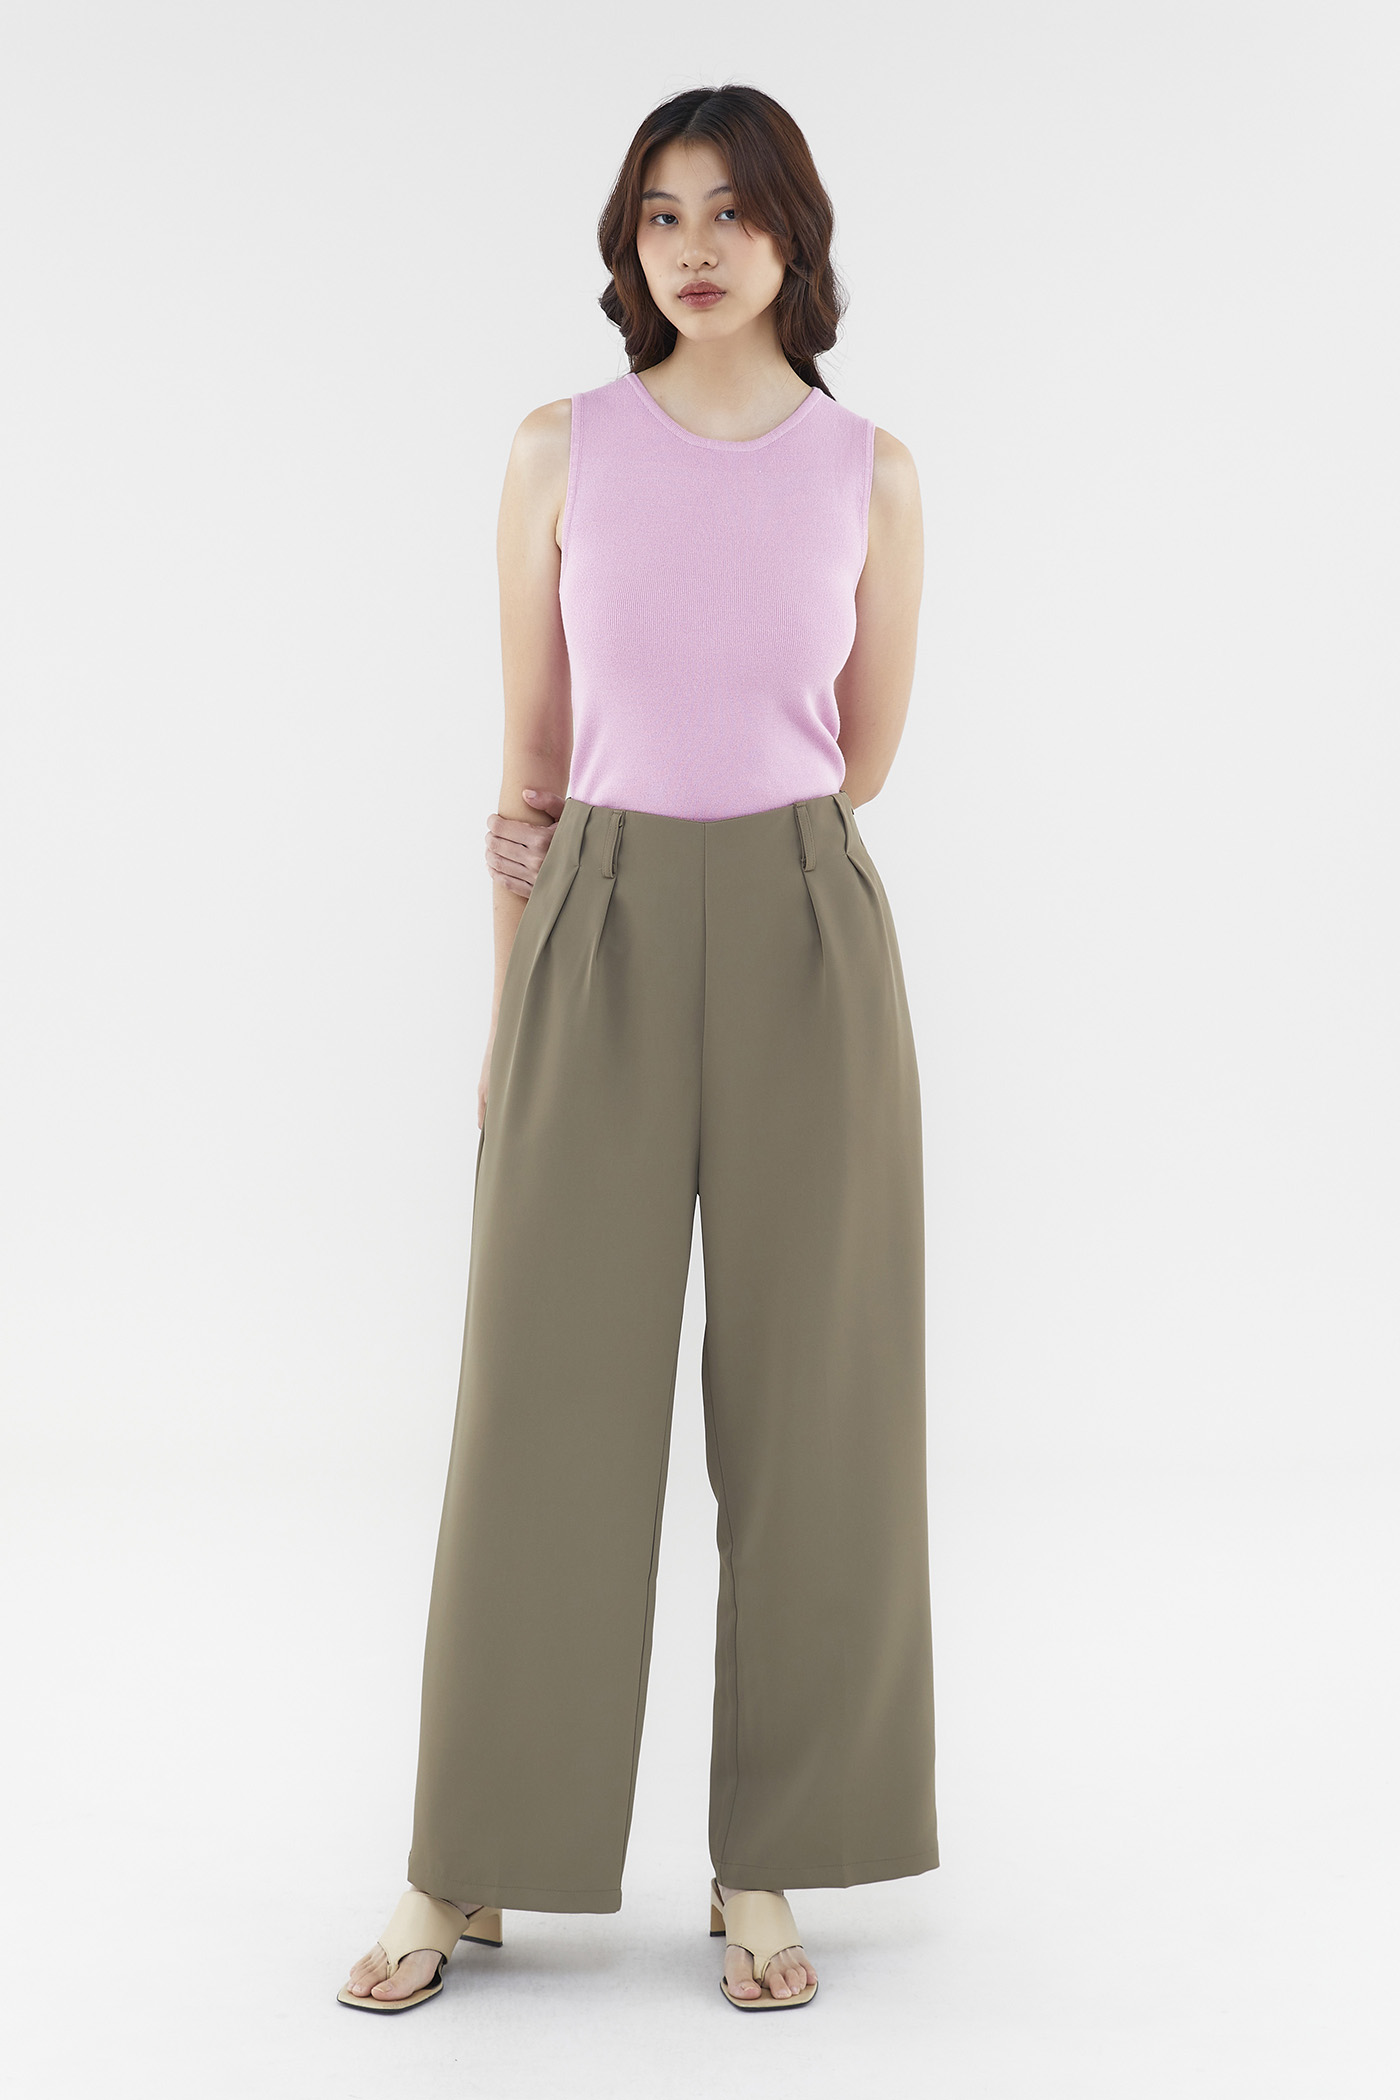 Women's Pleated High Waisted Wide Leg Pants, Belted Palazzo Trousers, Grey  Linen Pants, Long Linen Pants, Women Linen Pants, Xiaolizi 0308 - Etsy